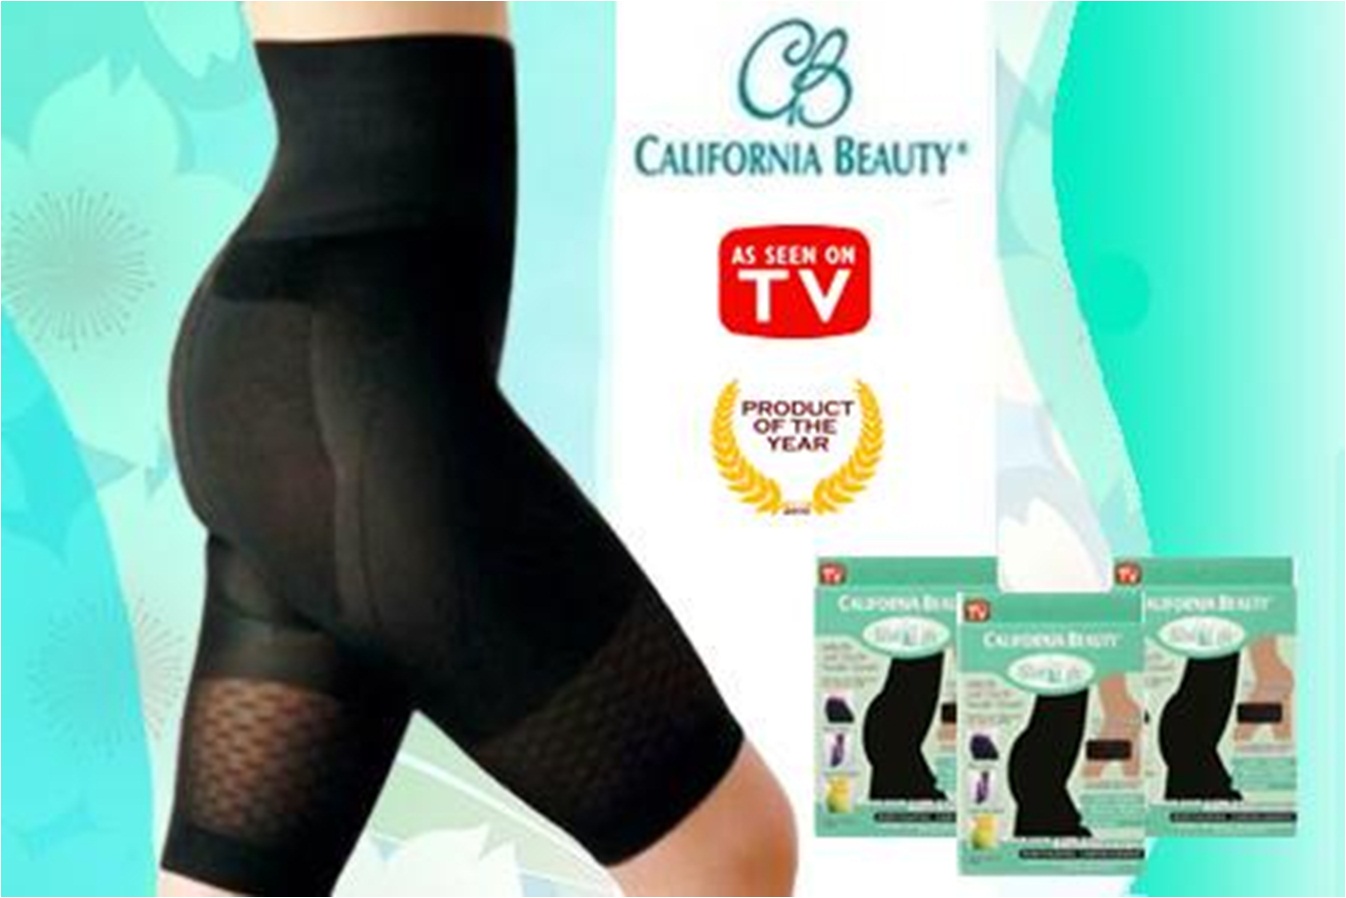 California Beauty Slim Lift Extreme Shaper For Gentlemen Pants Suit With  Big Discount BodyShaping Garment And Slimming Pants Set OPP PACKING From  Ladymm, $5,546.35